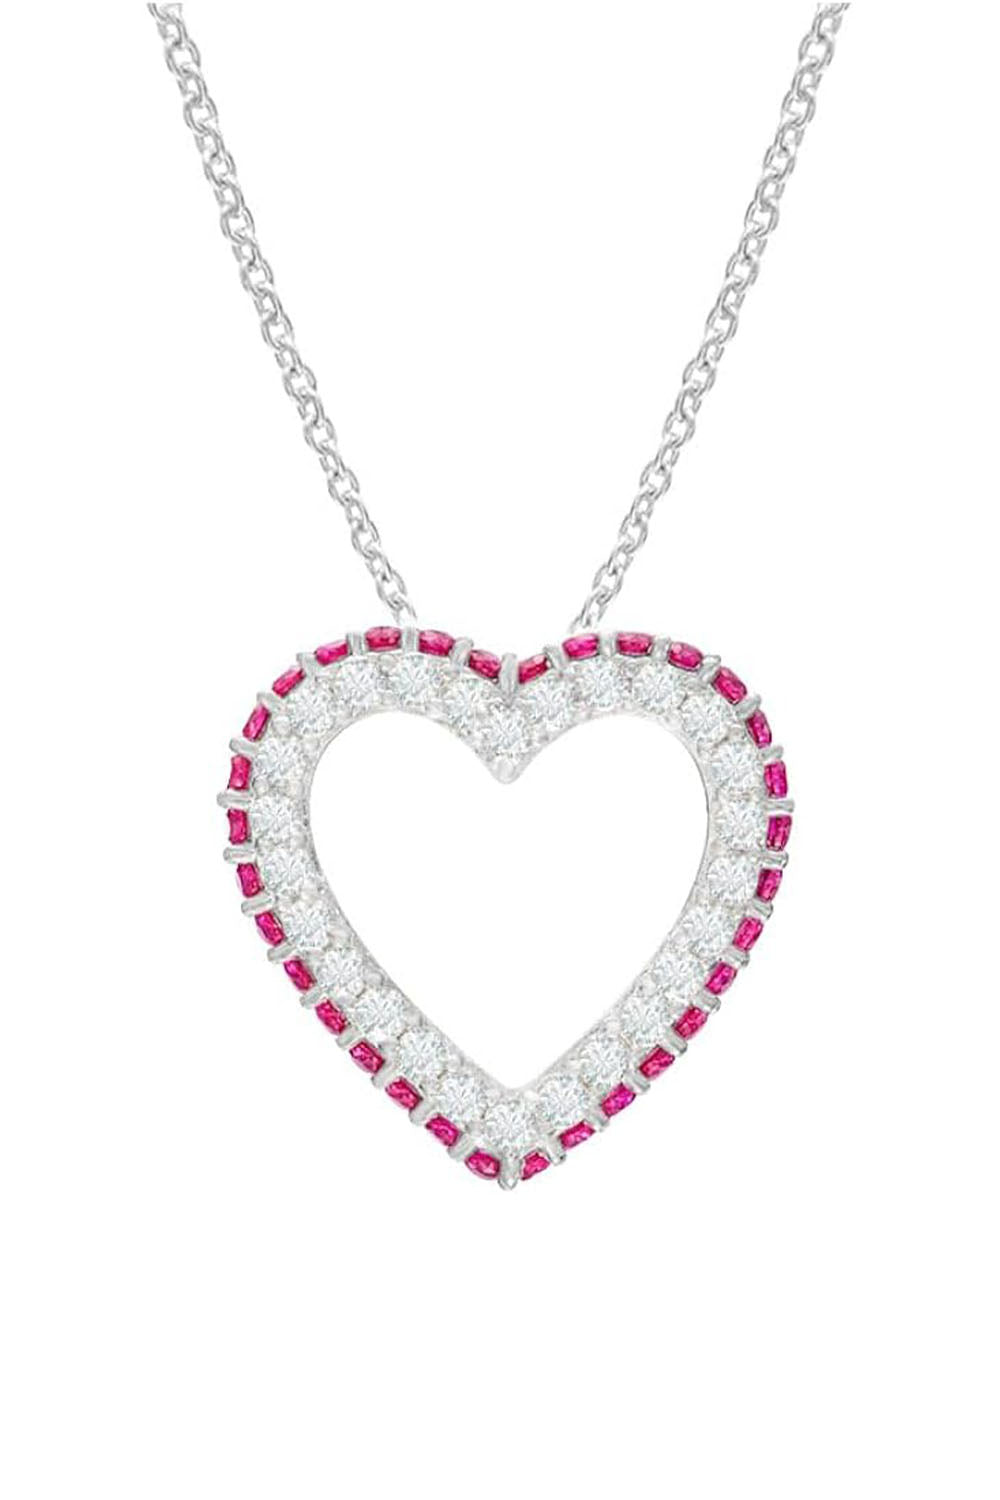 White Gold Color Pink Ruby Birthstone Gemstone Heart Pendant Necklace